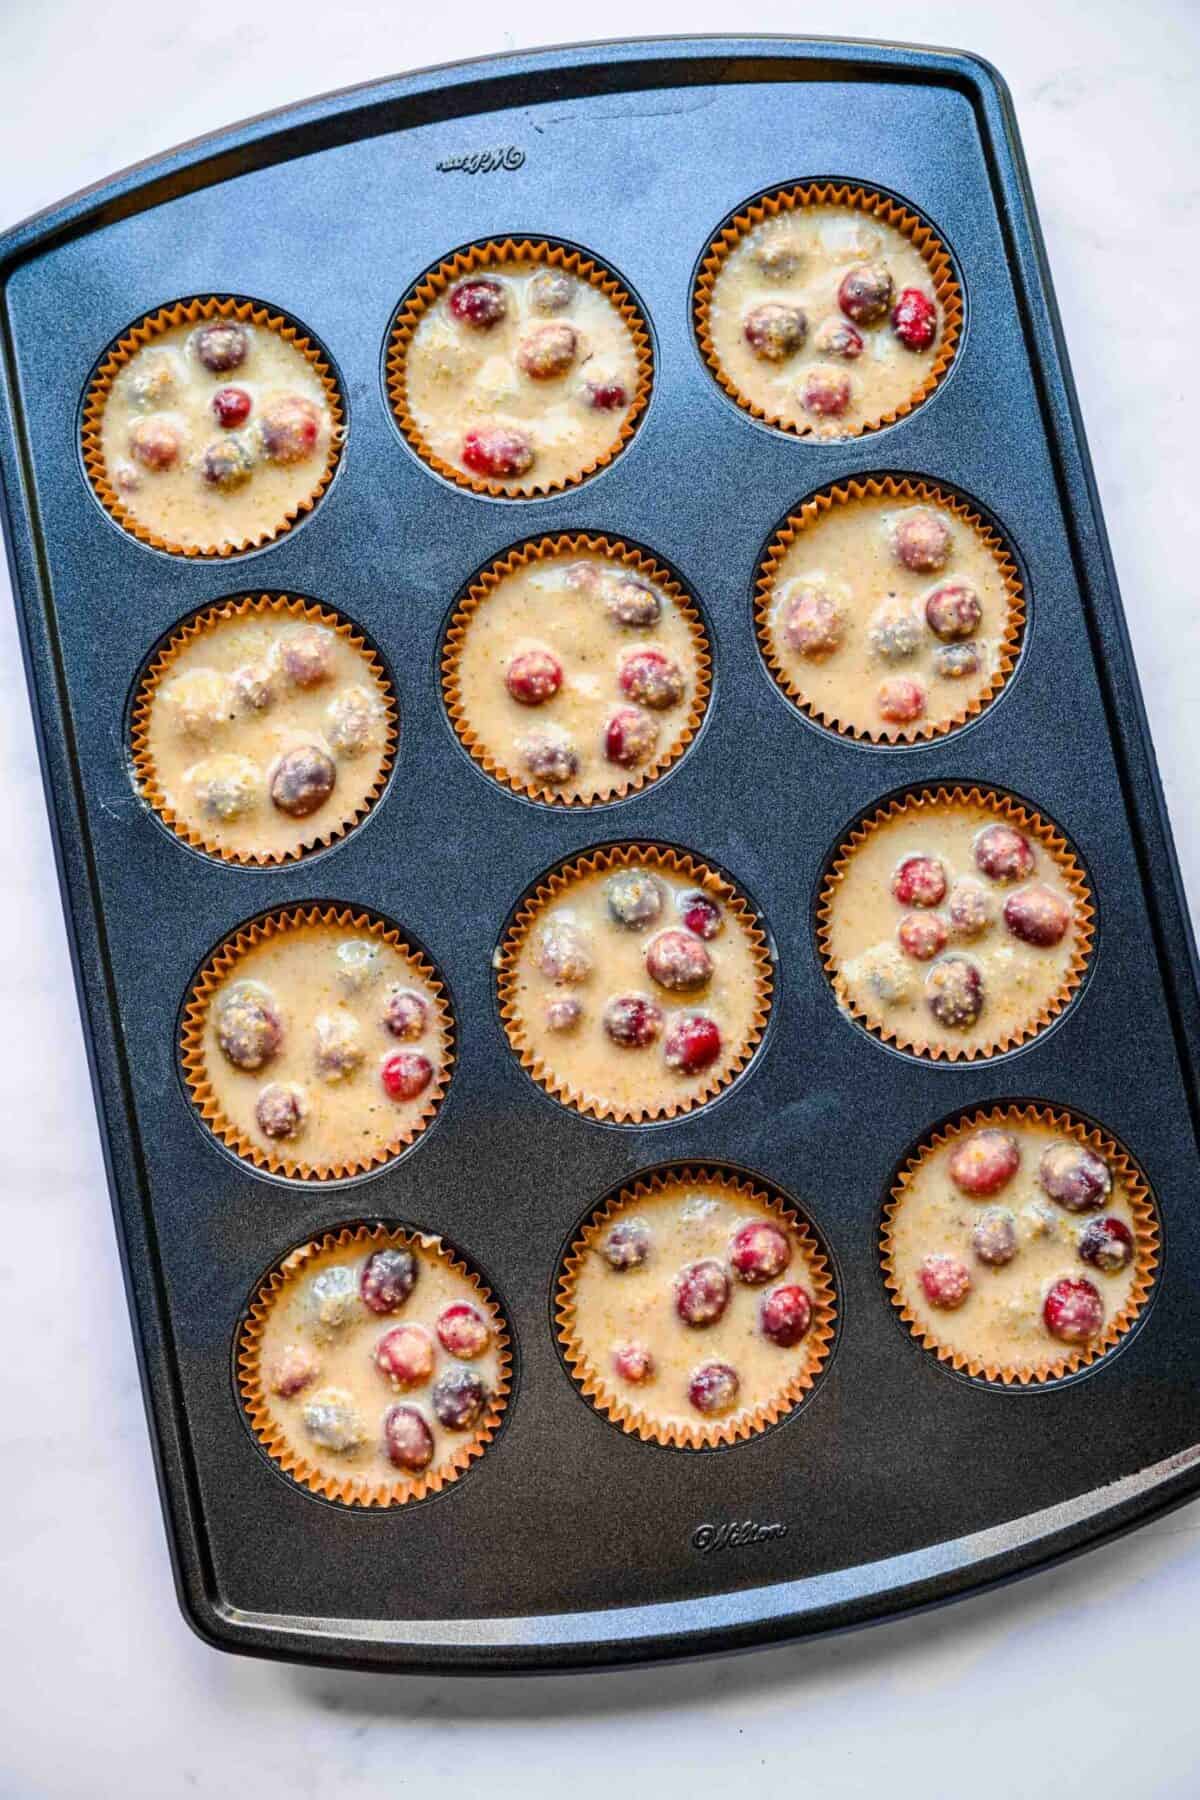 A muffin tin with 12 uncooked cranberry cornbread muffins in it